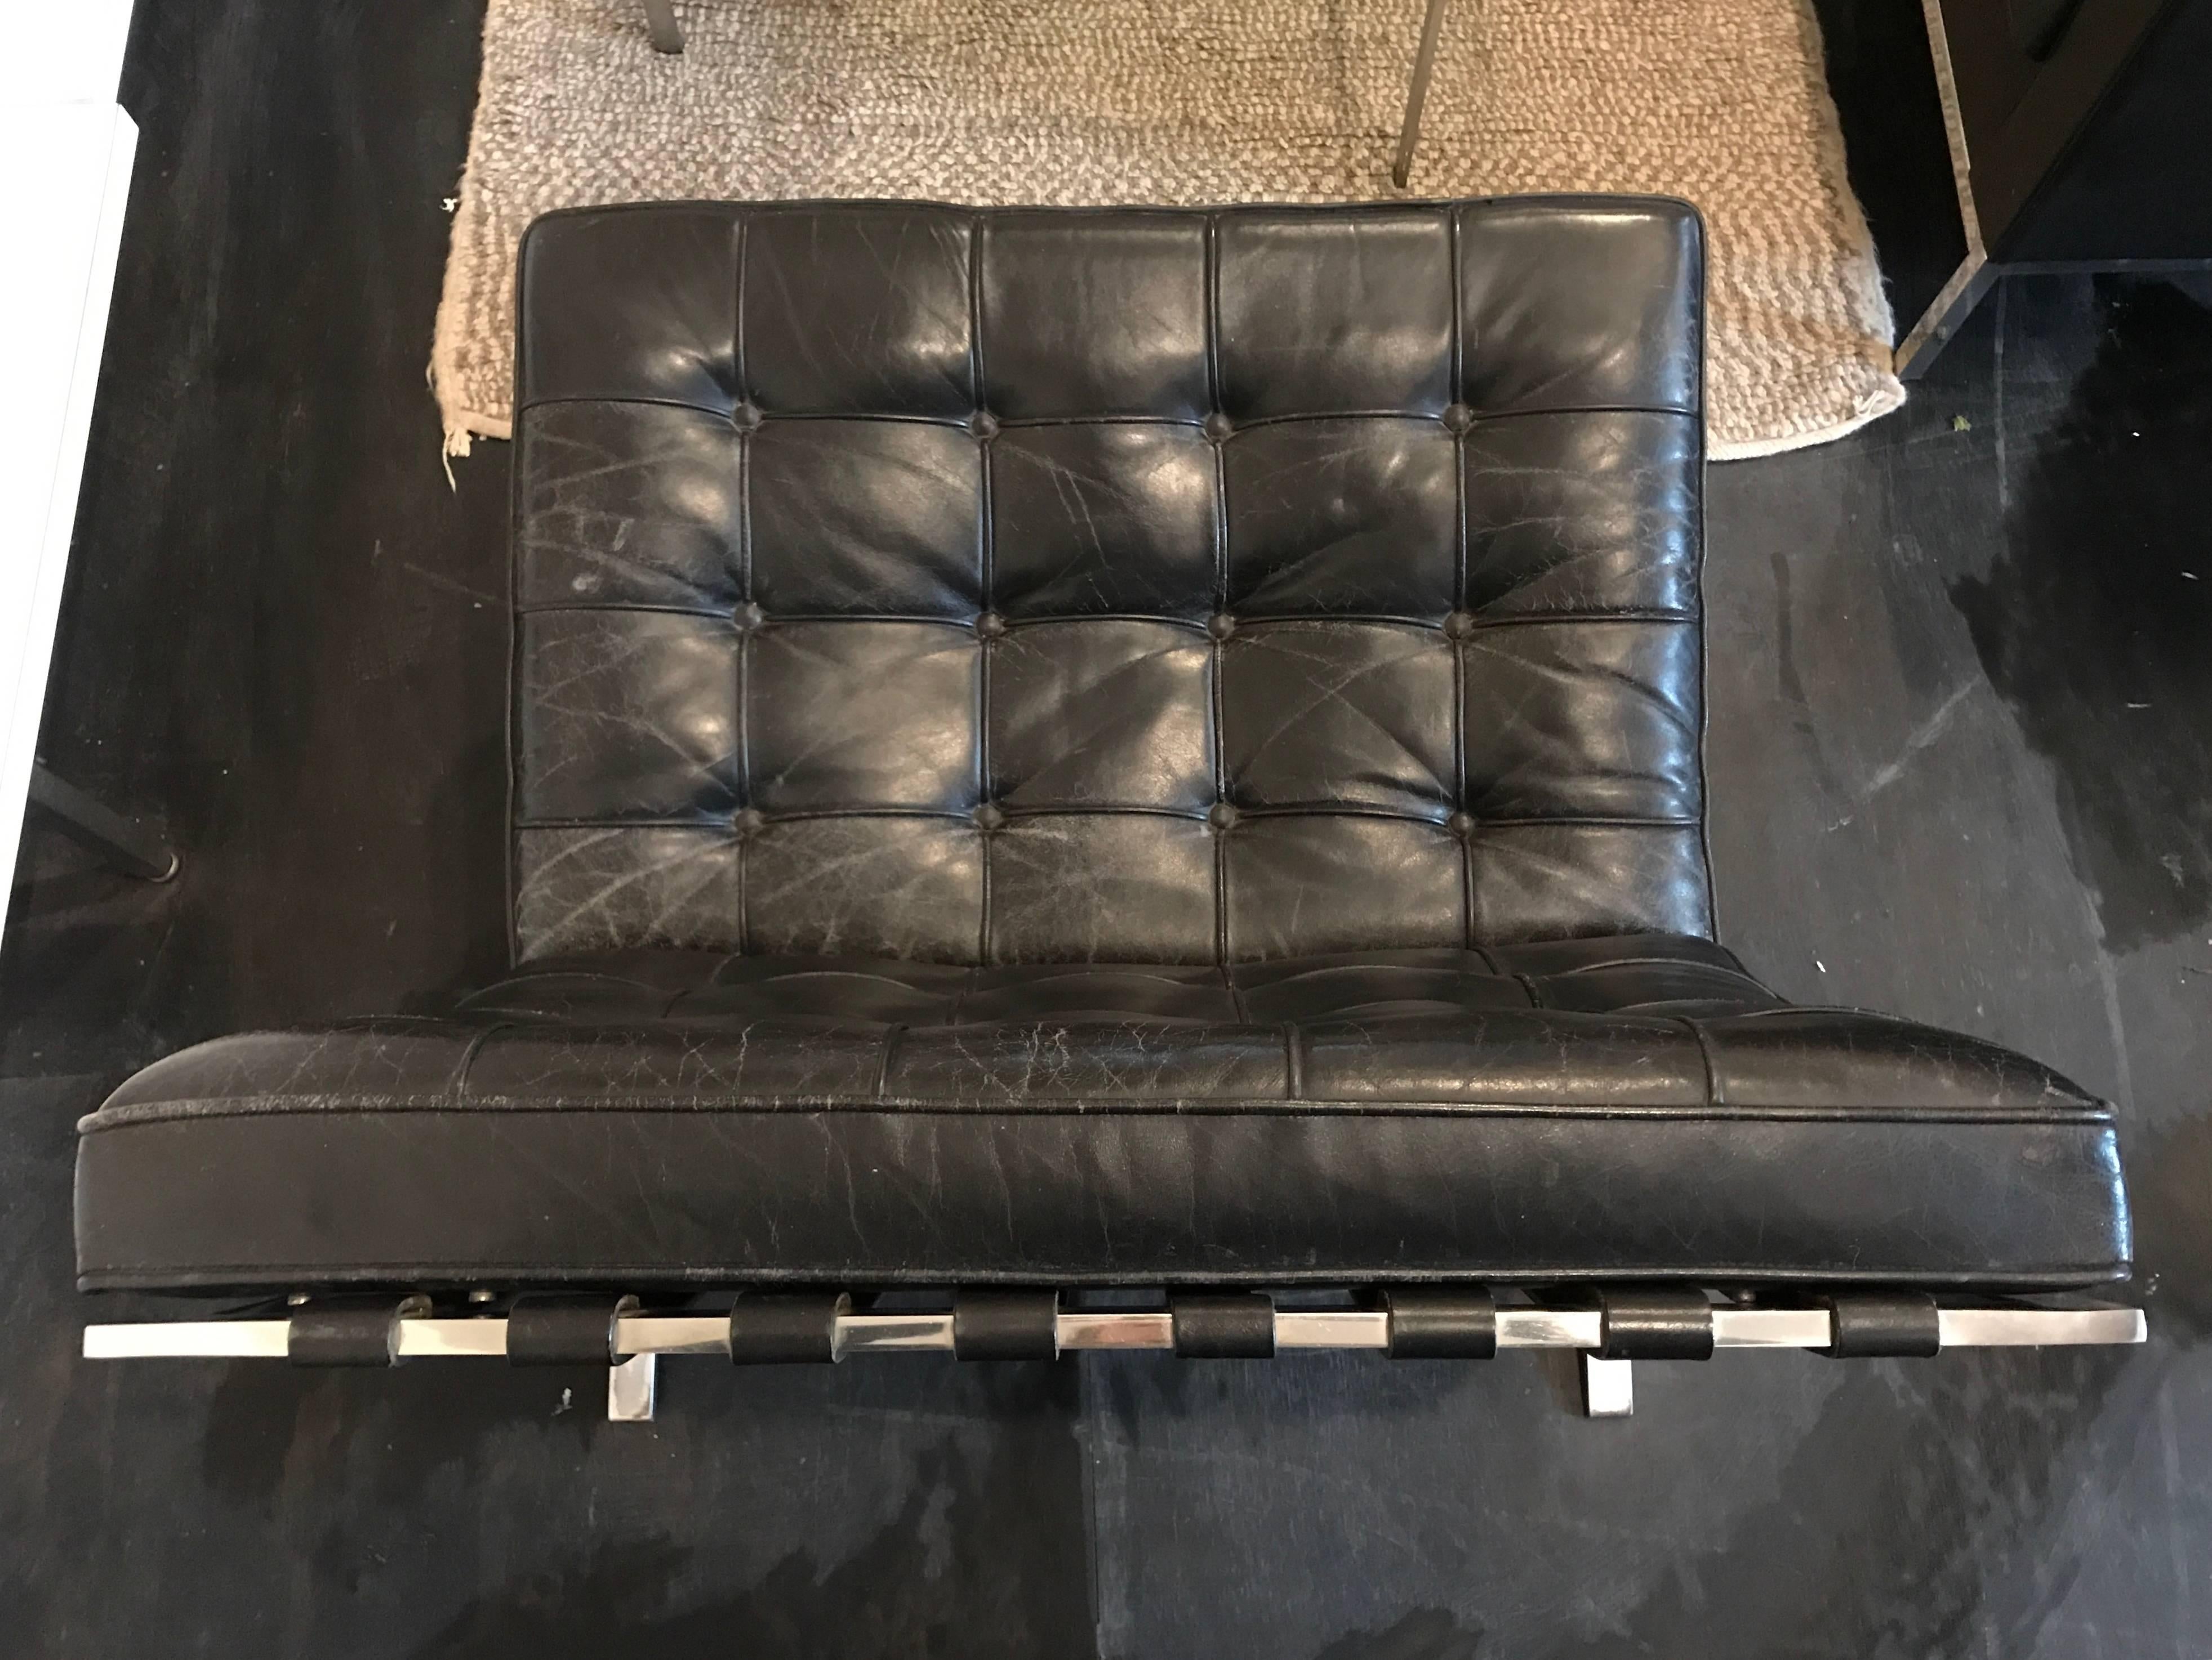 American Ludwig Mies van der Rohe Pair of Barcelona Chairs, Knoll, Black Leather